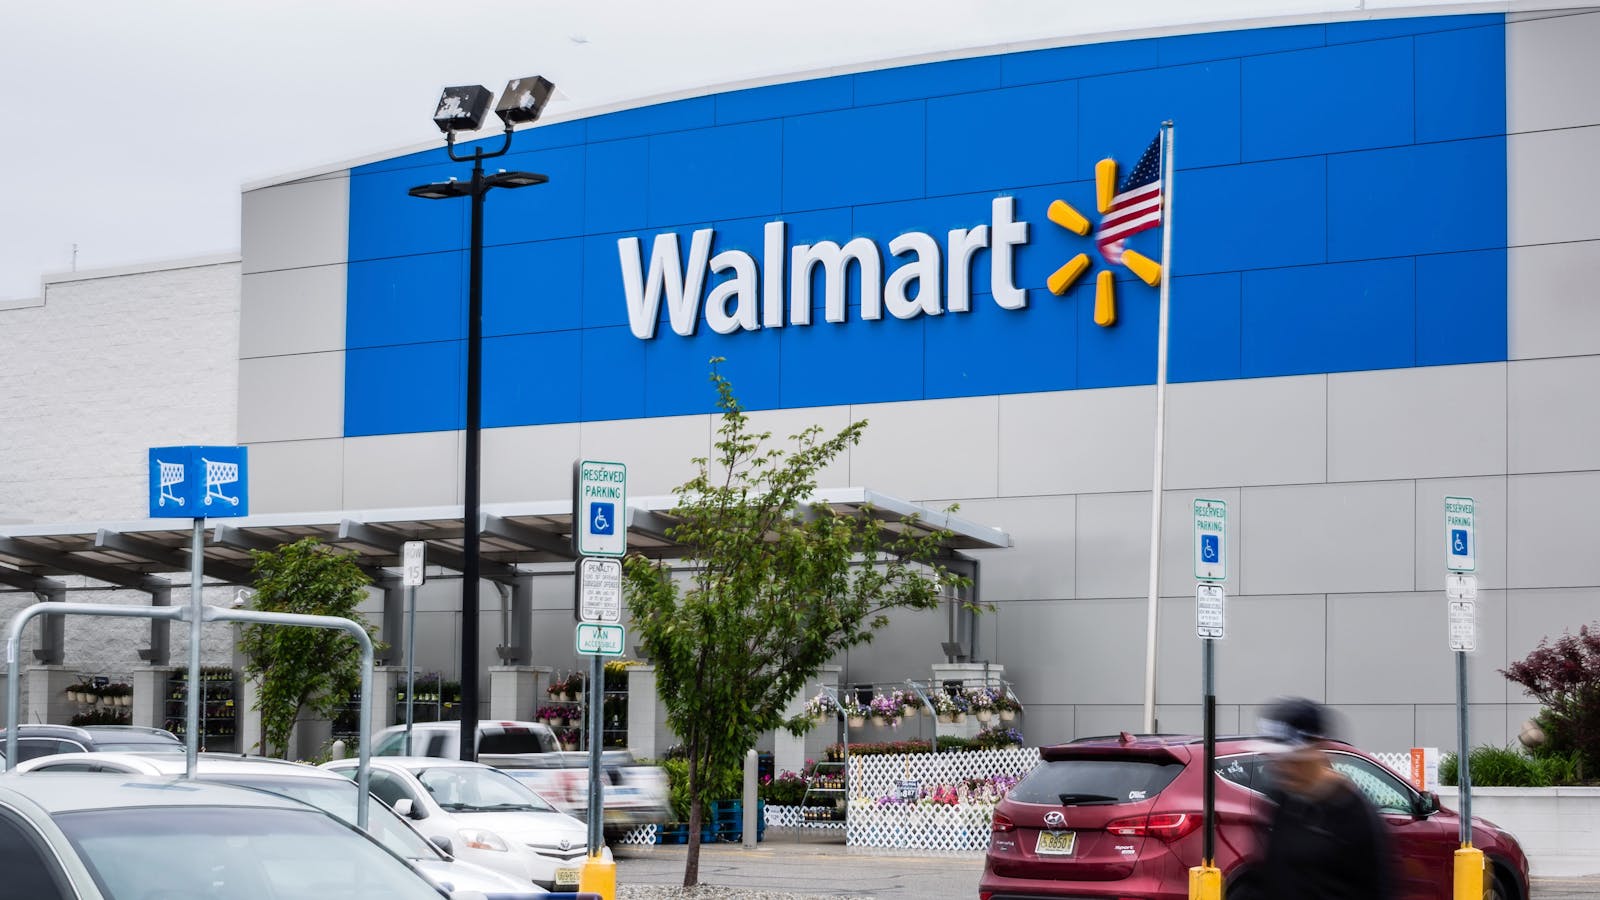 A Walmart store in New Jersey. Photo by Bloomberg